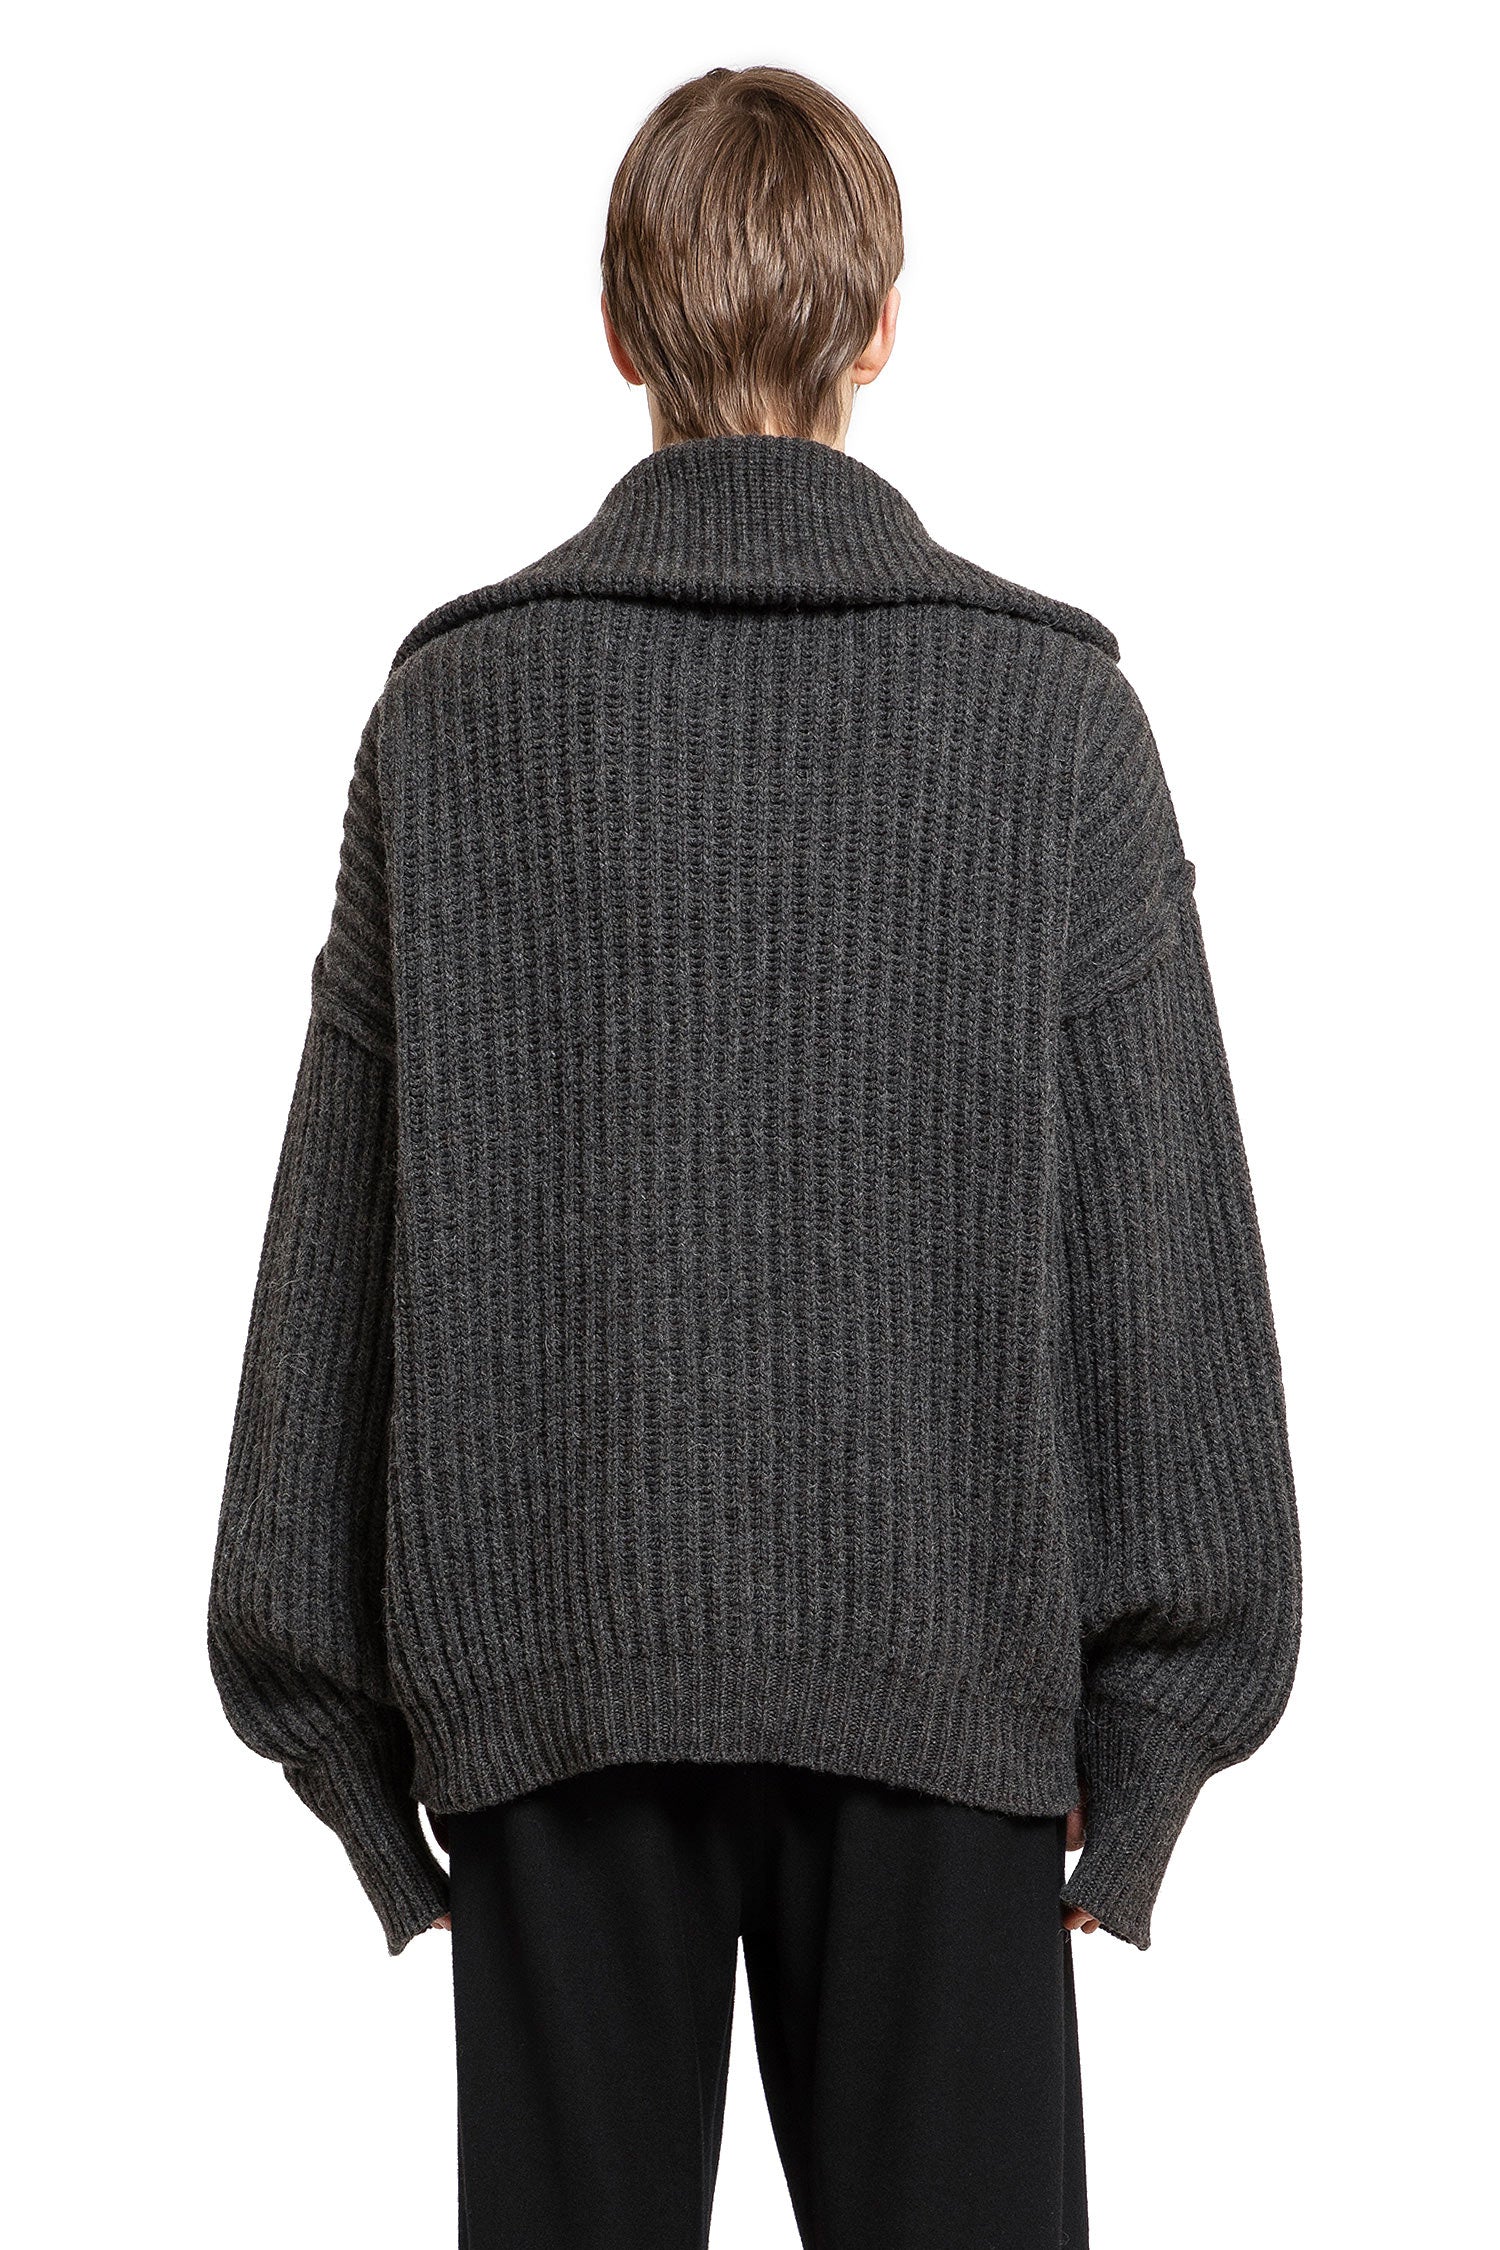 LEMAIRE MAN BROWN KNITWEAR